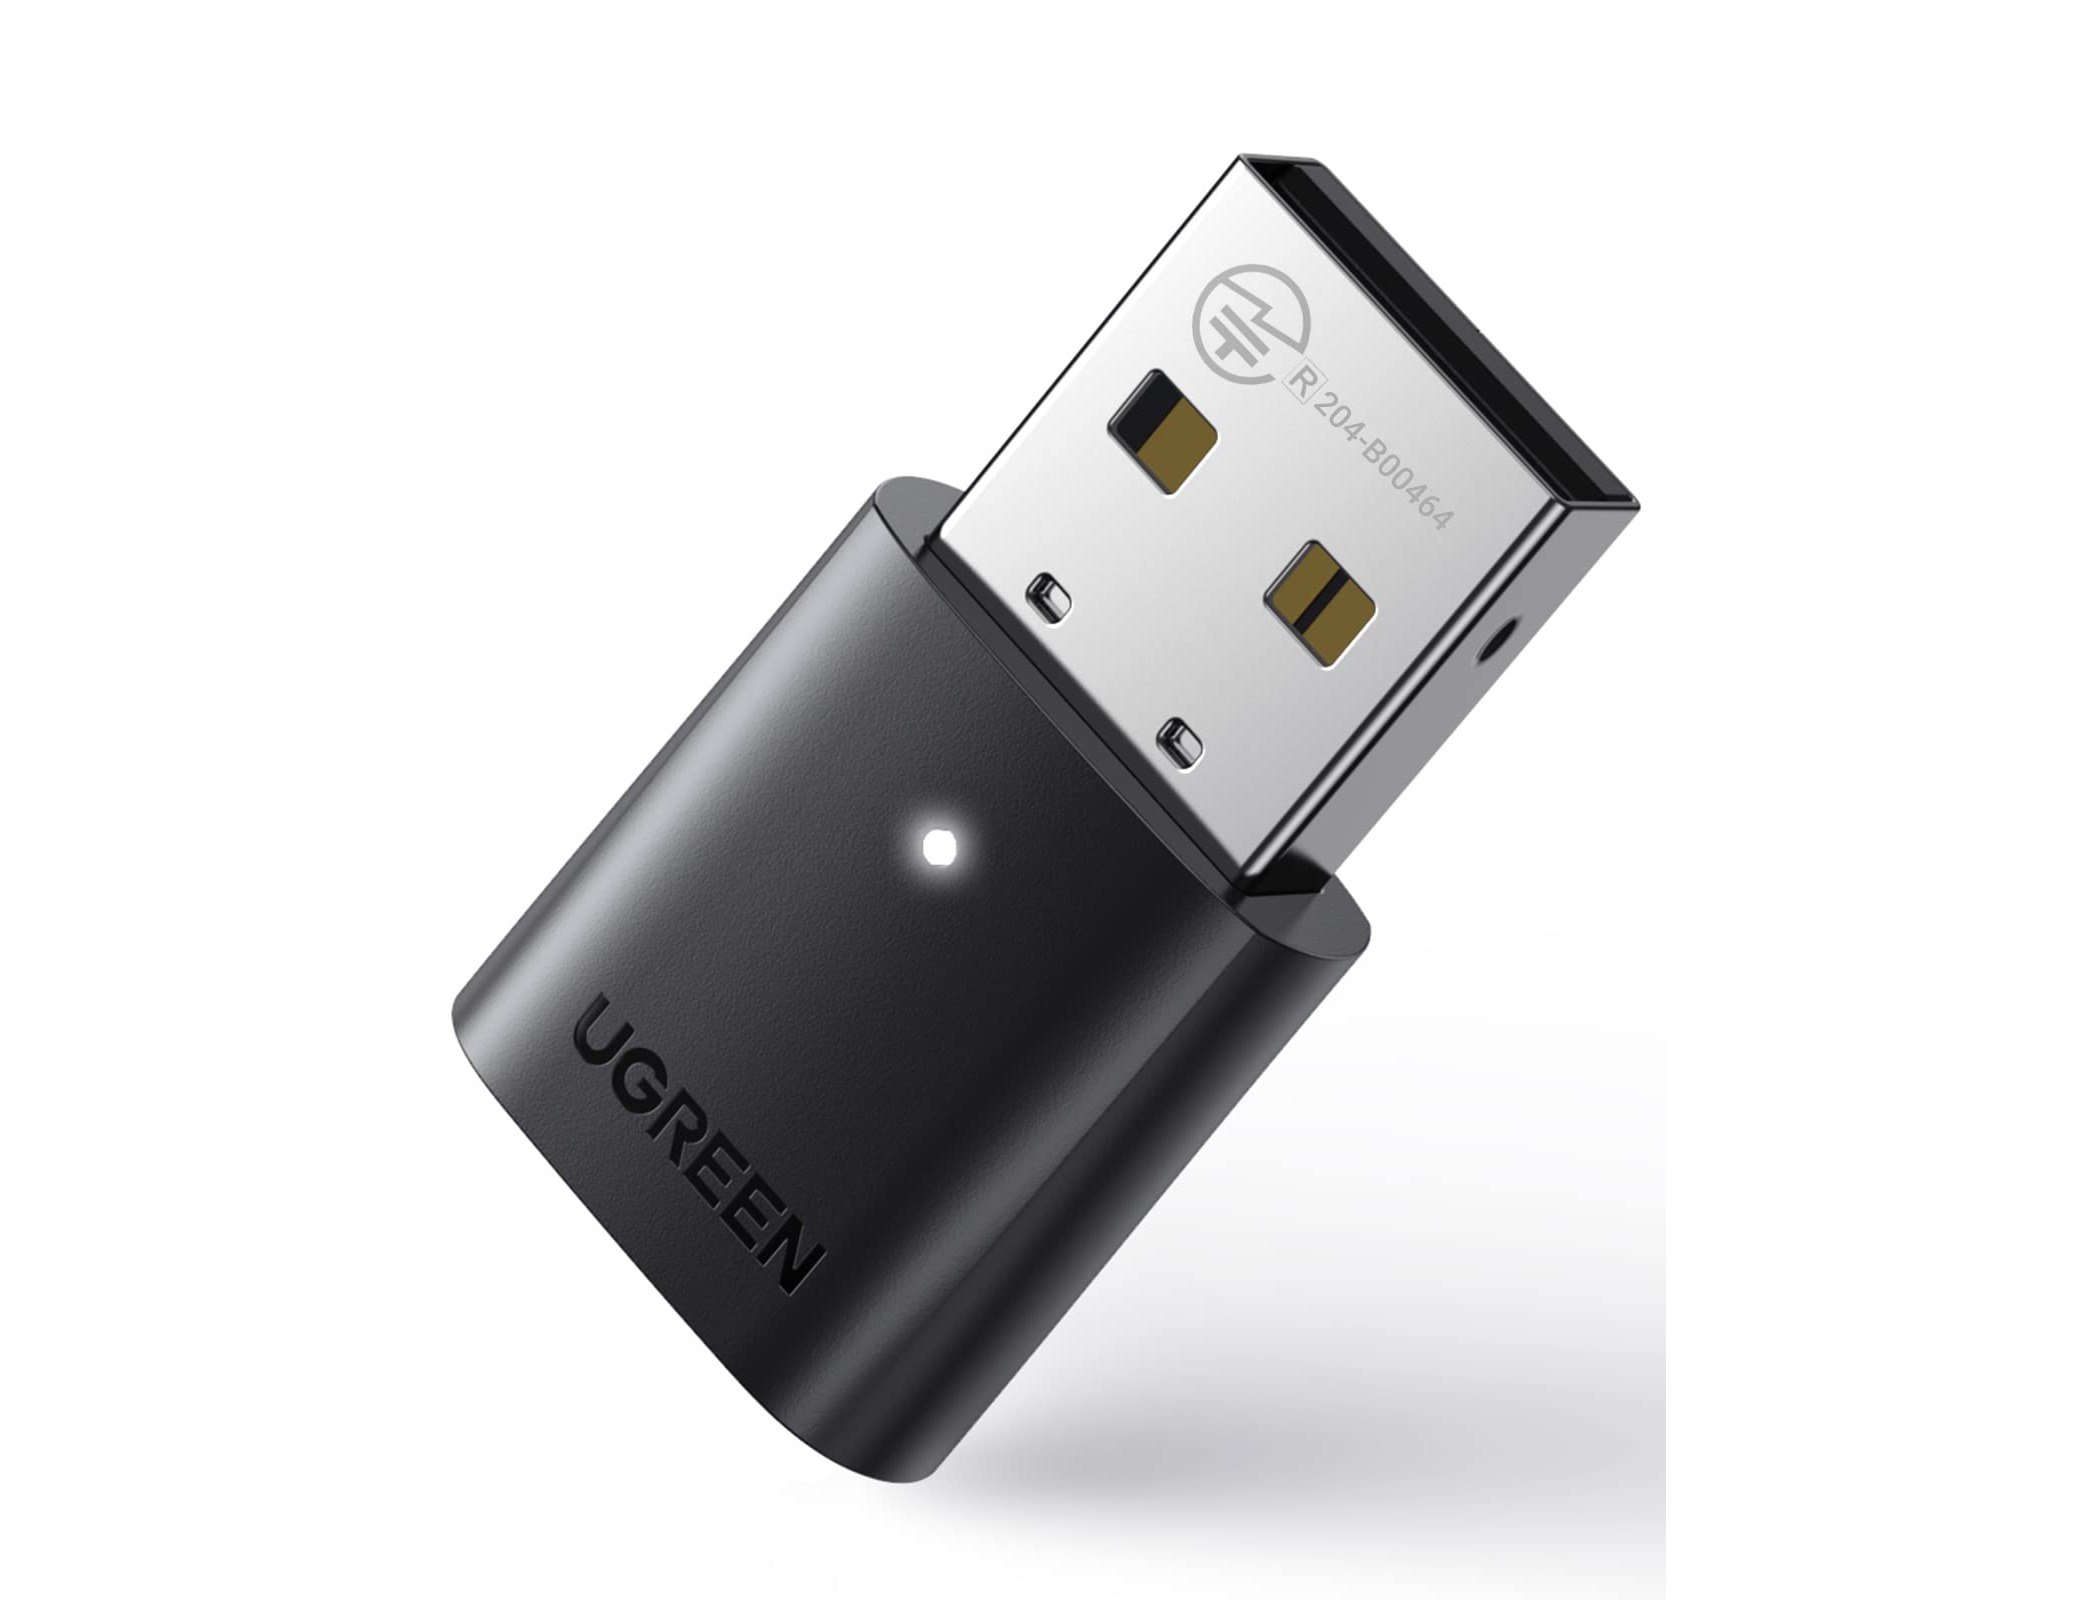 Phone As A Dongle: Using Your Phone As A Bluetooth Dongle